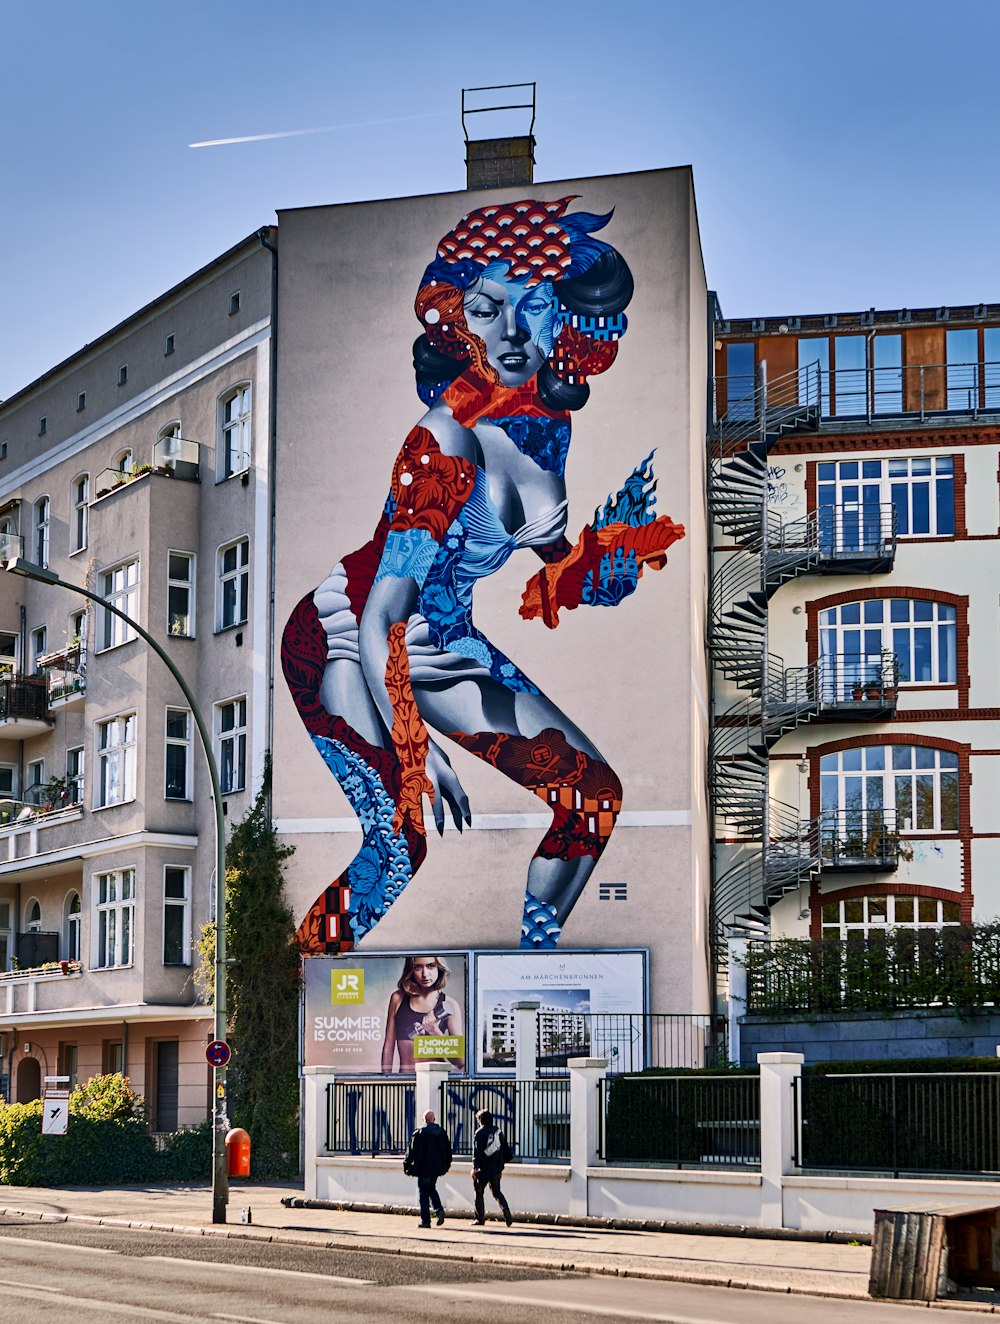 a large mural of a cartoon character on a building